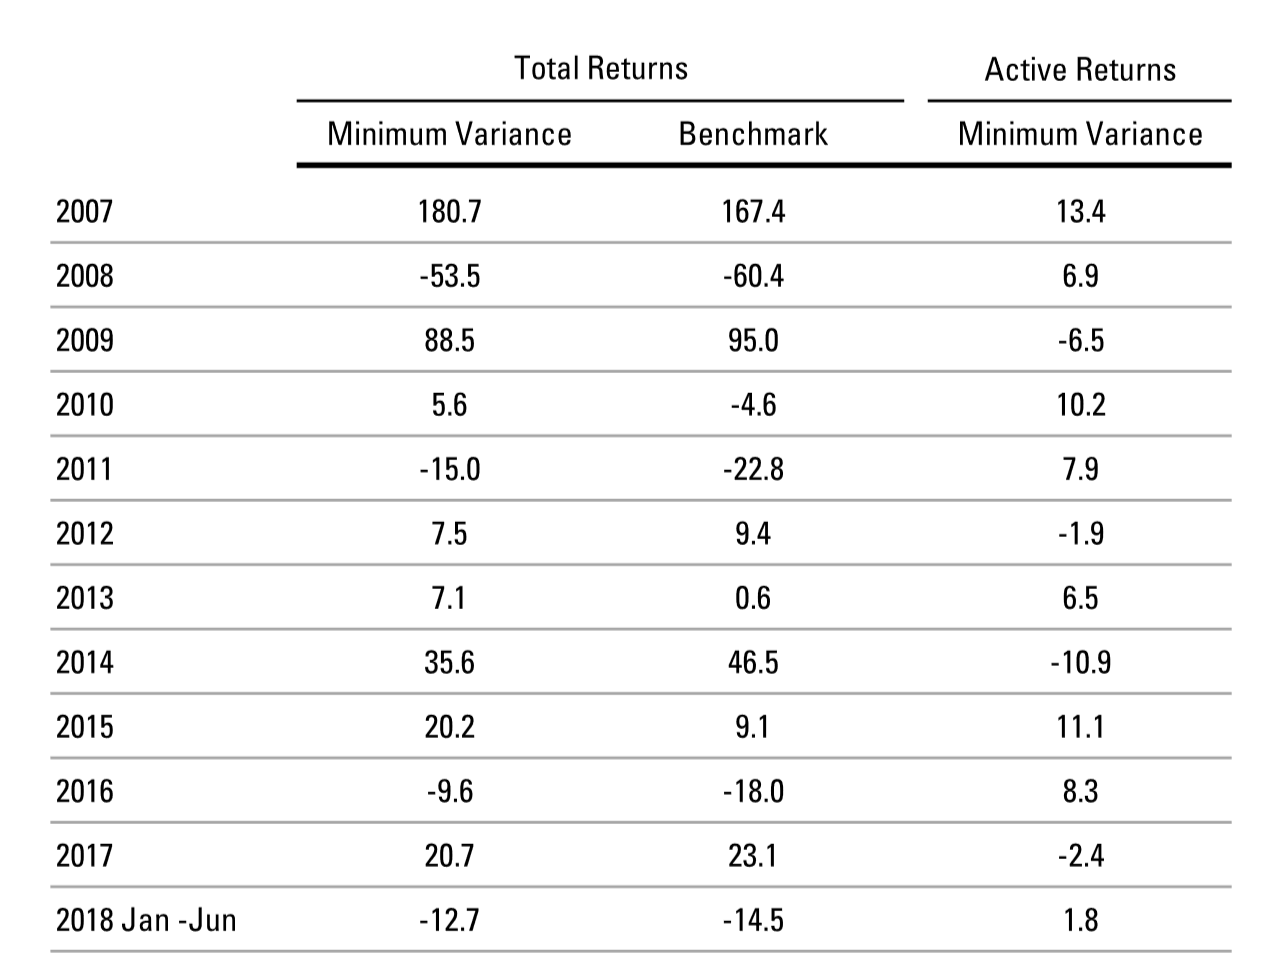 HYPOTHETICAL COMPOUNDED ANNUAL RETURNS